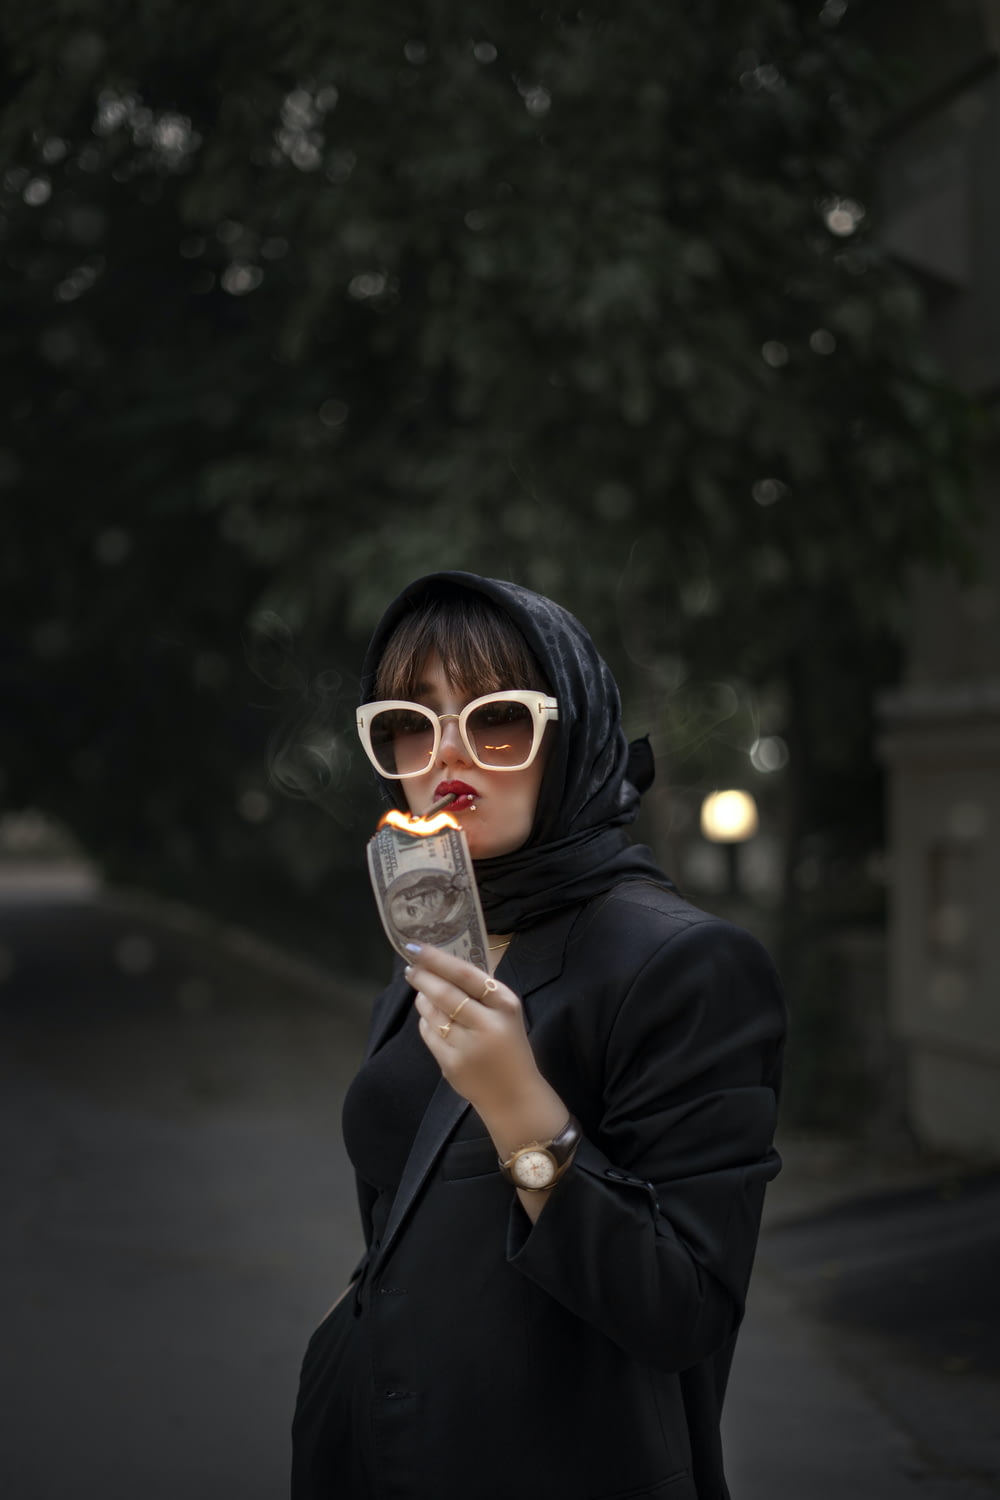 a woman wearing sunglasses holding a cell phone